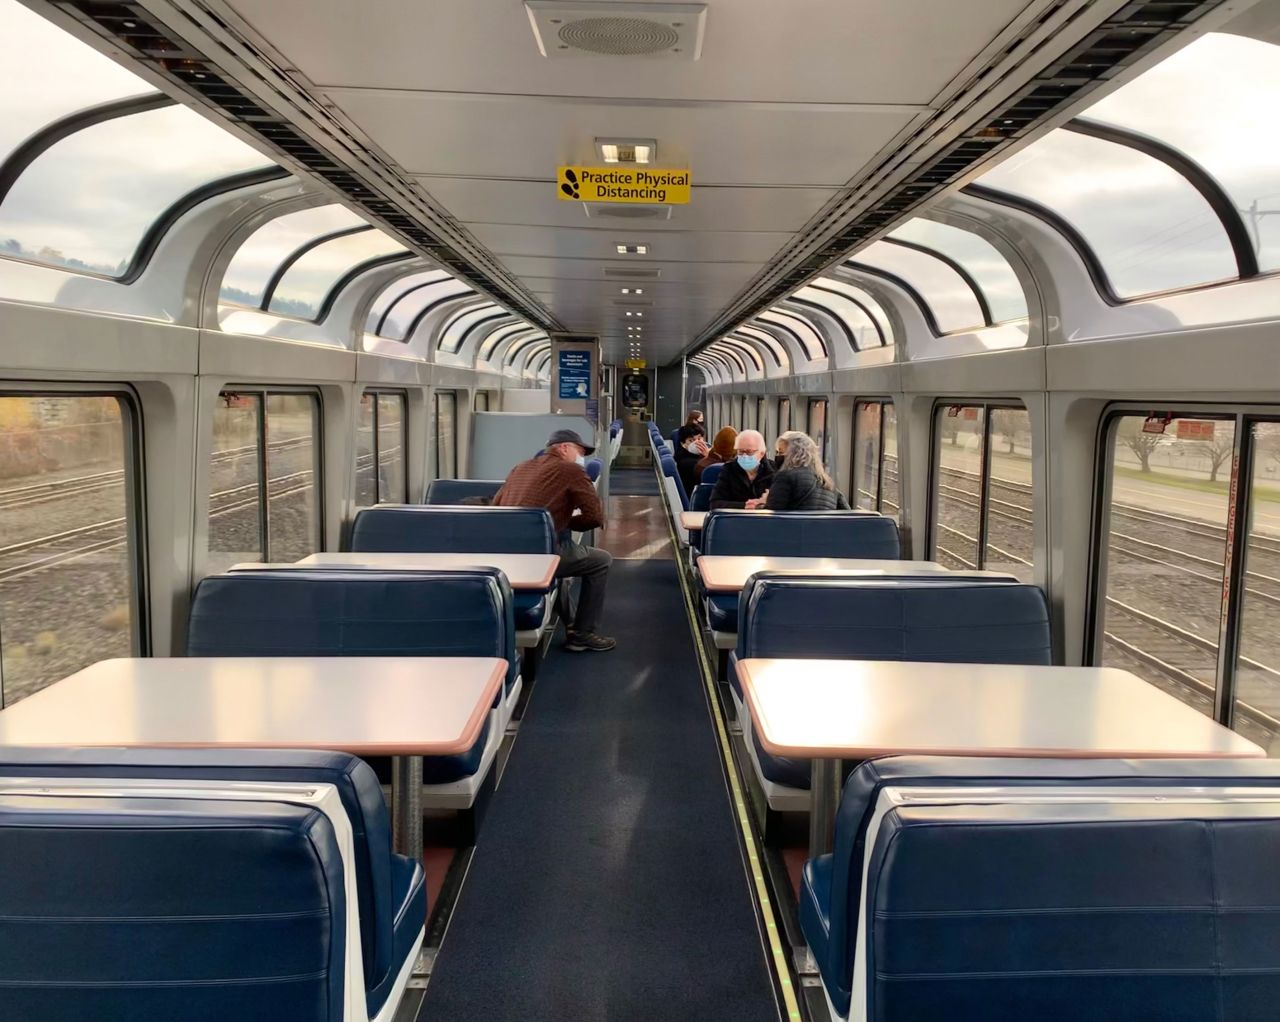 The sightseer lounge on the Coast Starlight train, pictured on November 24, 2021.